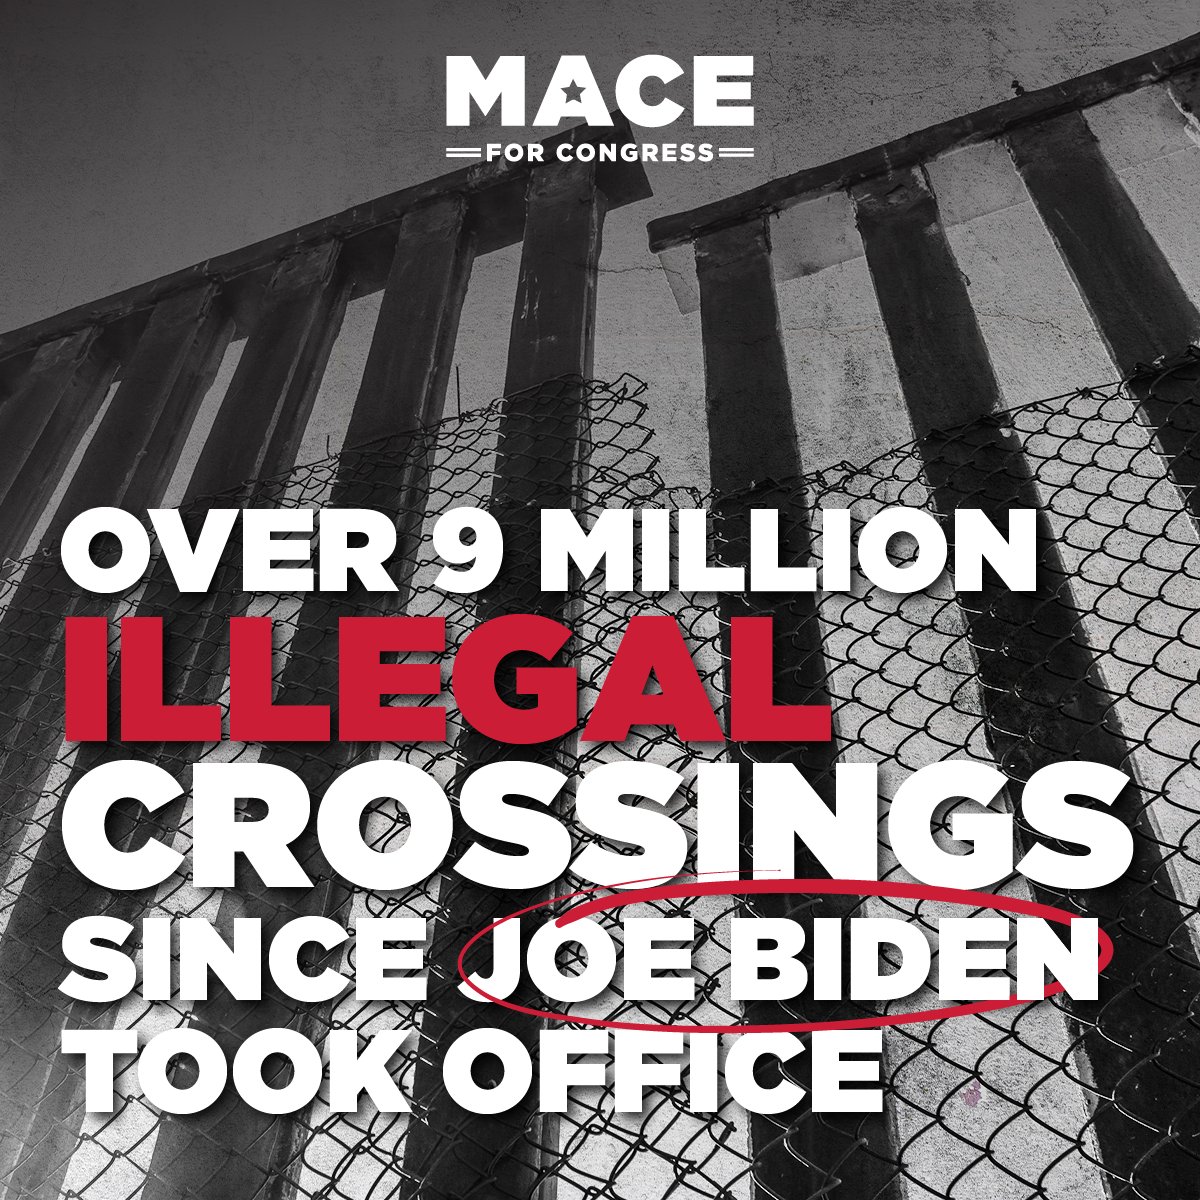 Allowing more than 9 million illegals to enter our country, some of whom are on the terrorist watch list and are human and drug traffickers, is a recipe for disaster. We MUST secure the border and reinstitute President Trump’s border policy that kept America safe.